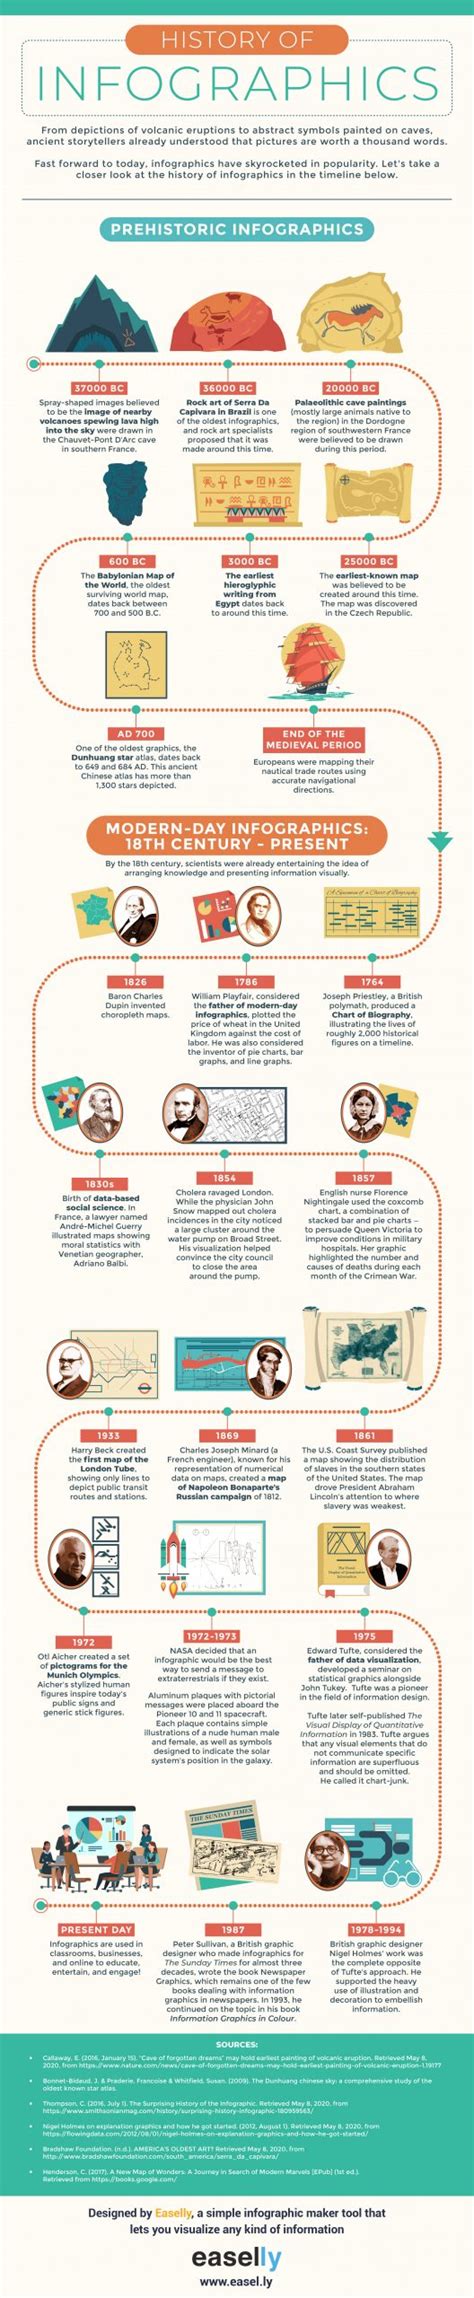 Video The History Of Infographics And Its Evolution